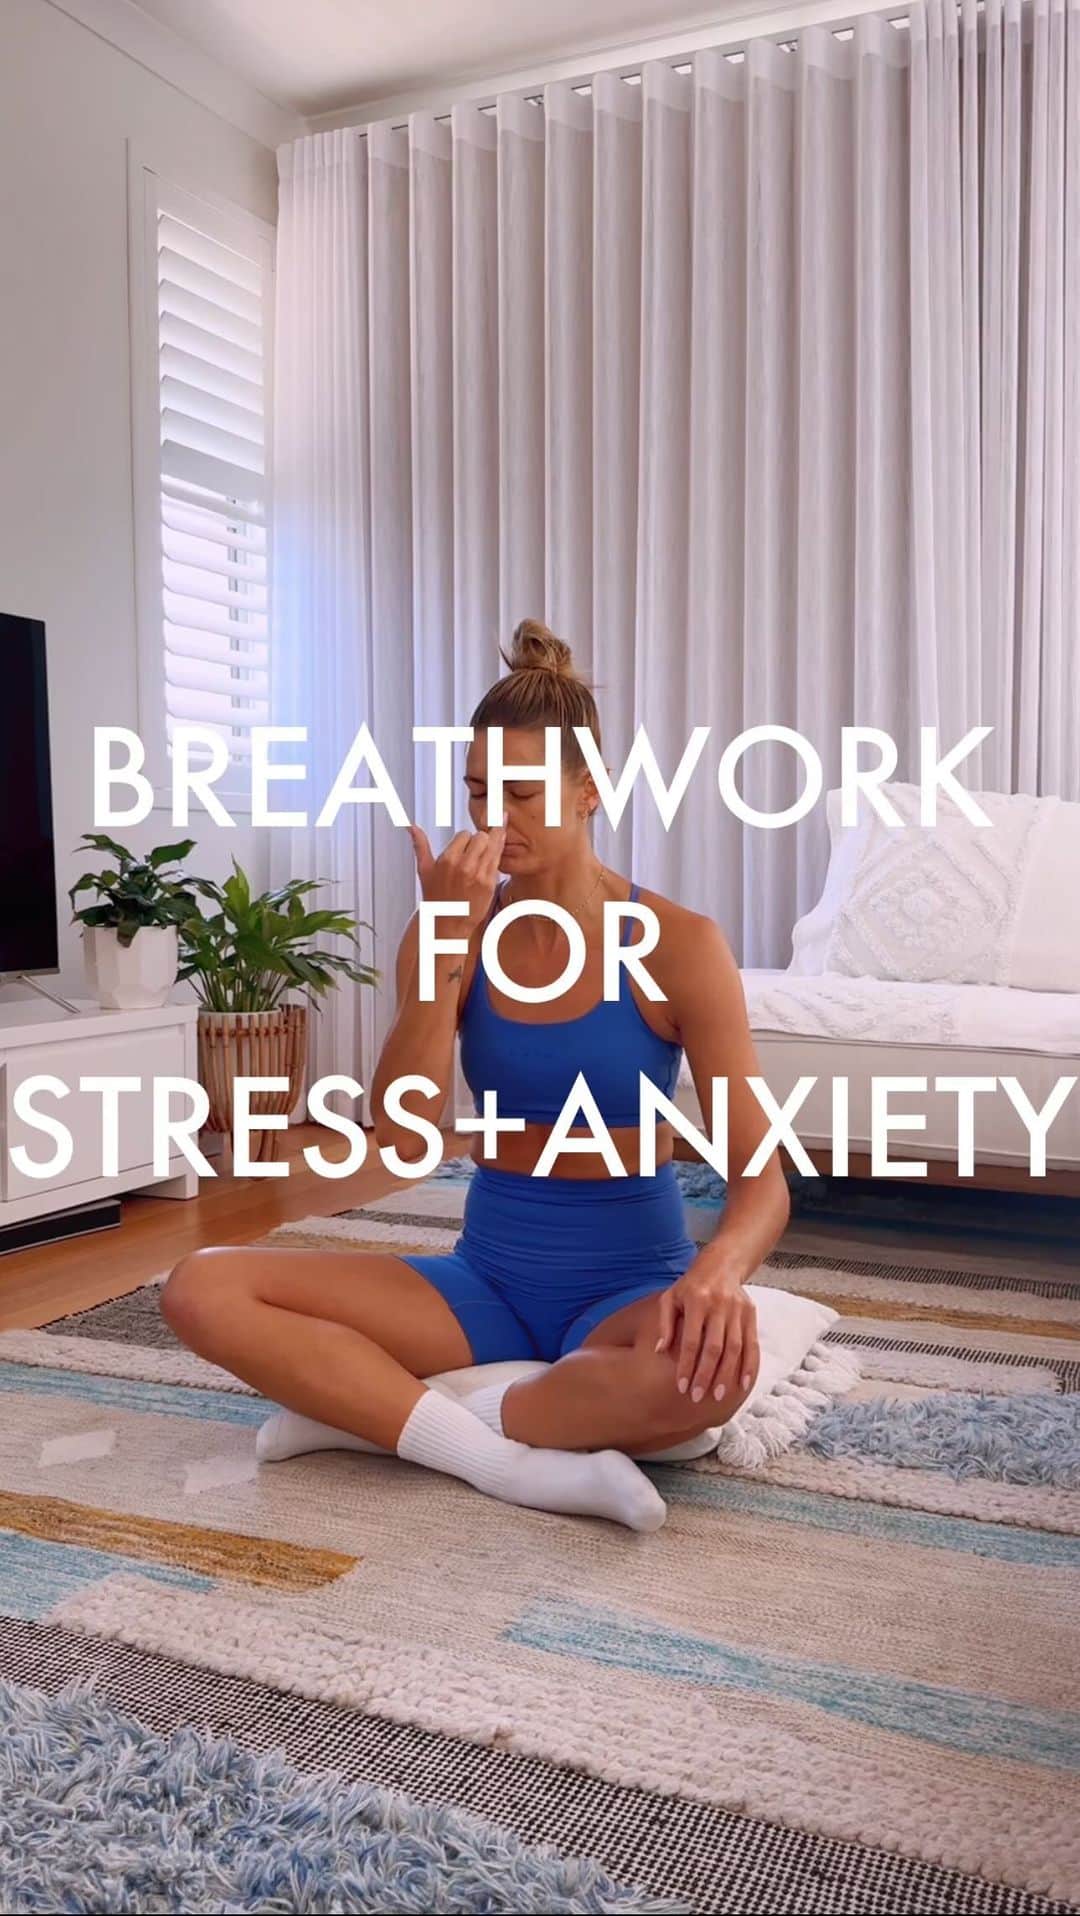 Amanda Biskのインスタグラム：「This simple breath work exercise can completely change your day, and he is why…  ✨ Reduces stress response ✨ Eases anxiety ✨ Focus your attention to the present ✨ Clear the mind ✨ Balance L+R sides of the brain (logic + emotions) ✨ Improve oxygen circulation ✨ Improve breathing capacity ✨ Reduce heart rate & blood pressure  Alternate nostril breathing uses inhales and exhales to help balance the fiery right side 🔥 and cooling left side ❄️   HERE’S HOW TO DO IT:  Before you start…Exhale completely through your mouth.  1. Block the left nostril, INHALE RIGHT 2. Block the right nostril, EXHALE LEFT 3. INHALE LEFT, block the left nostril 4. EXHALE RIGHT  Repeat step 1-4 as many times as you need 🙏🏼  If you want more breathing & meditation I’ll be focusing on lots of new follow along classes on #freshbodyfitmind app ✨ You’ll find them in the brand new ‘MIND’ area!! 🧠 #breathwork #meditation #mindfulness #breathingexercise」